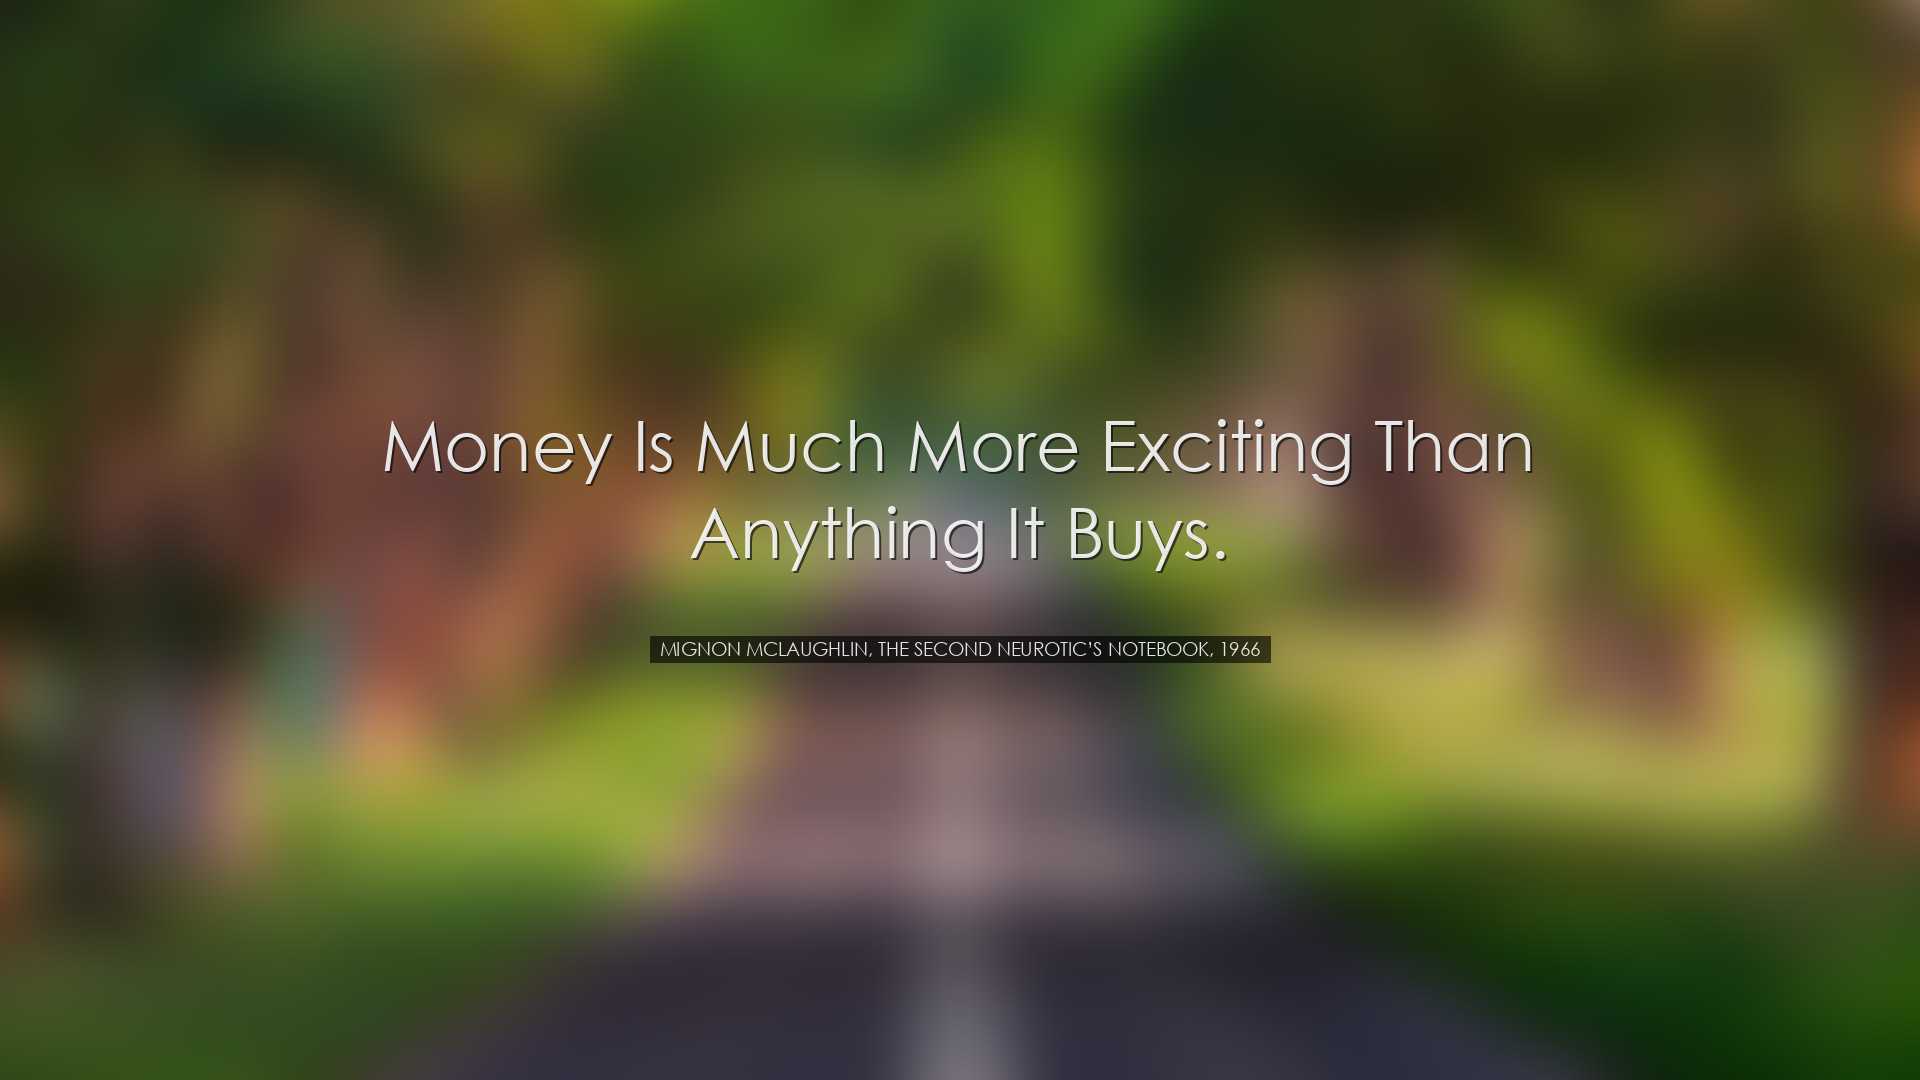 Money is much more exciting than anything it buys. - Mignon McLaug